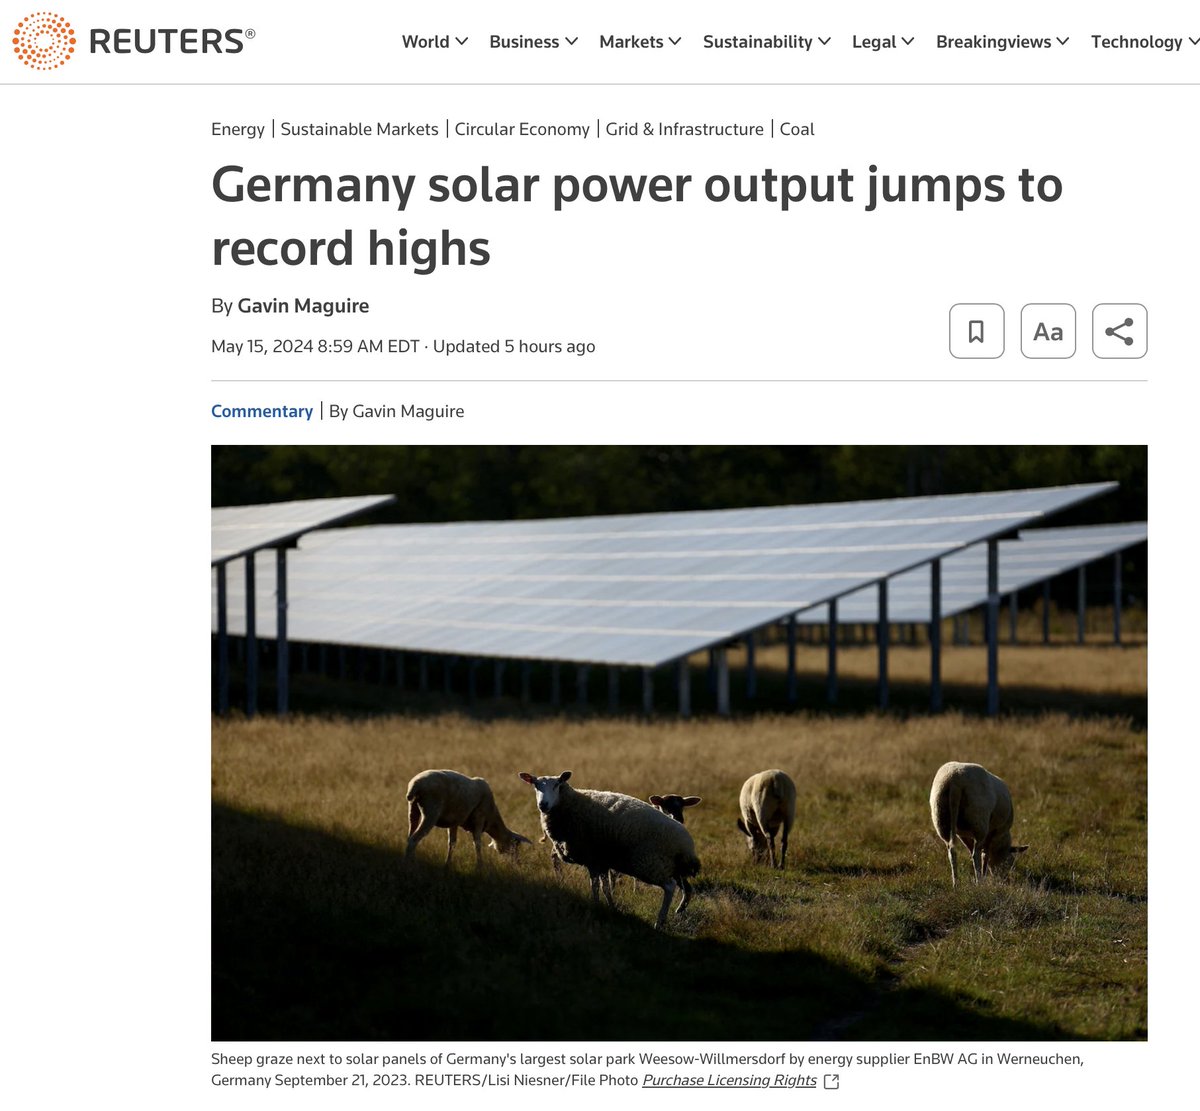 If you need more evidence that increased solar irradiance might be affecting the climate here you go: Solar farms produced over 60% of Germany's electricity for several hours a day over the past week... nearly 50% more than the long-term average for that particular week. While